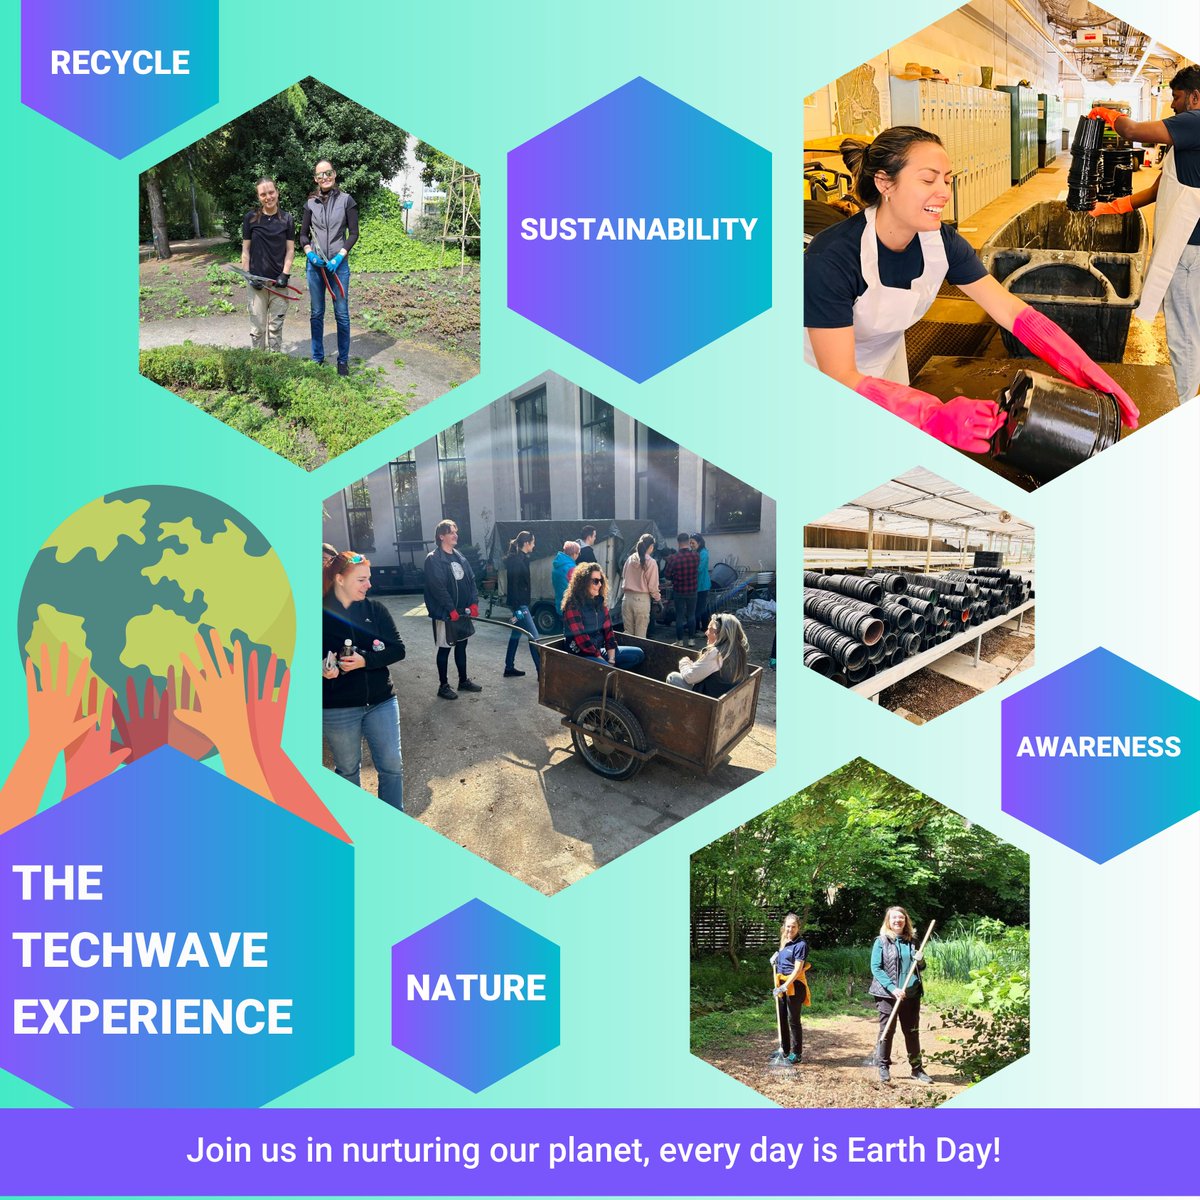 Reflecting on Earth Day with Techwave: Together, let's continue our commitment to sustainability and protect our planet for future generations. #TheTechwaveExperience #techwave #EarthDay #Sustainability